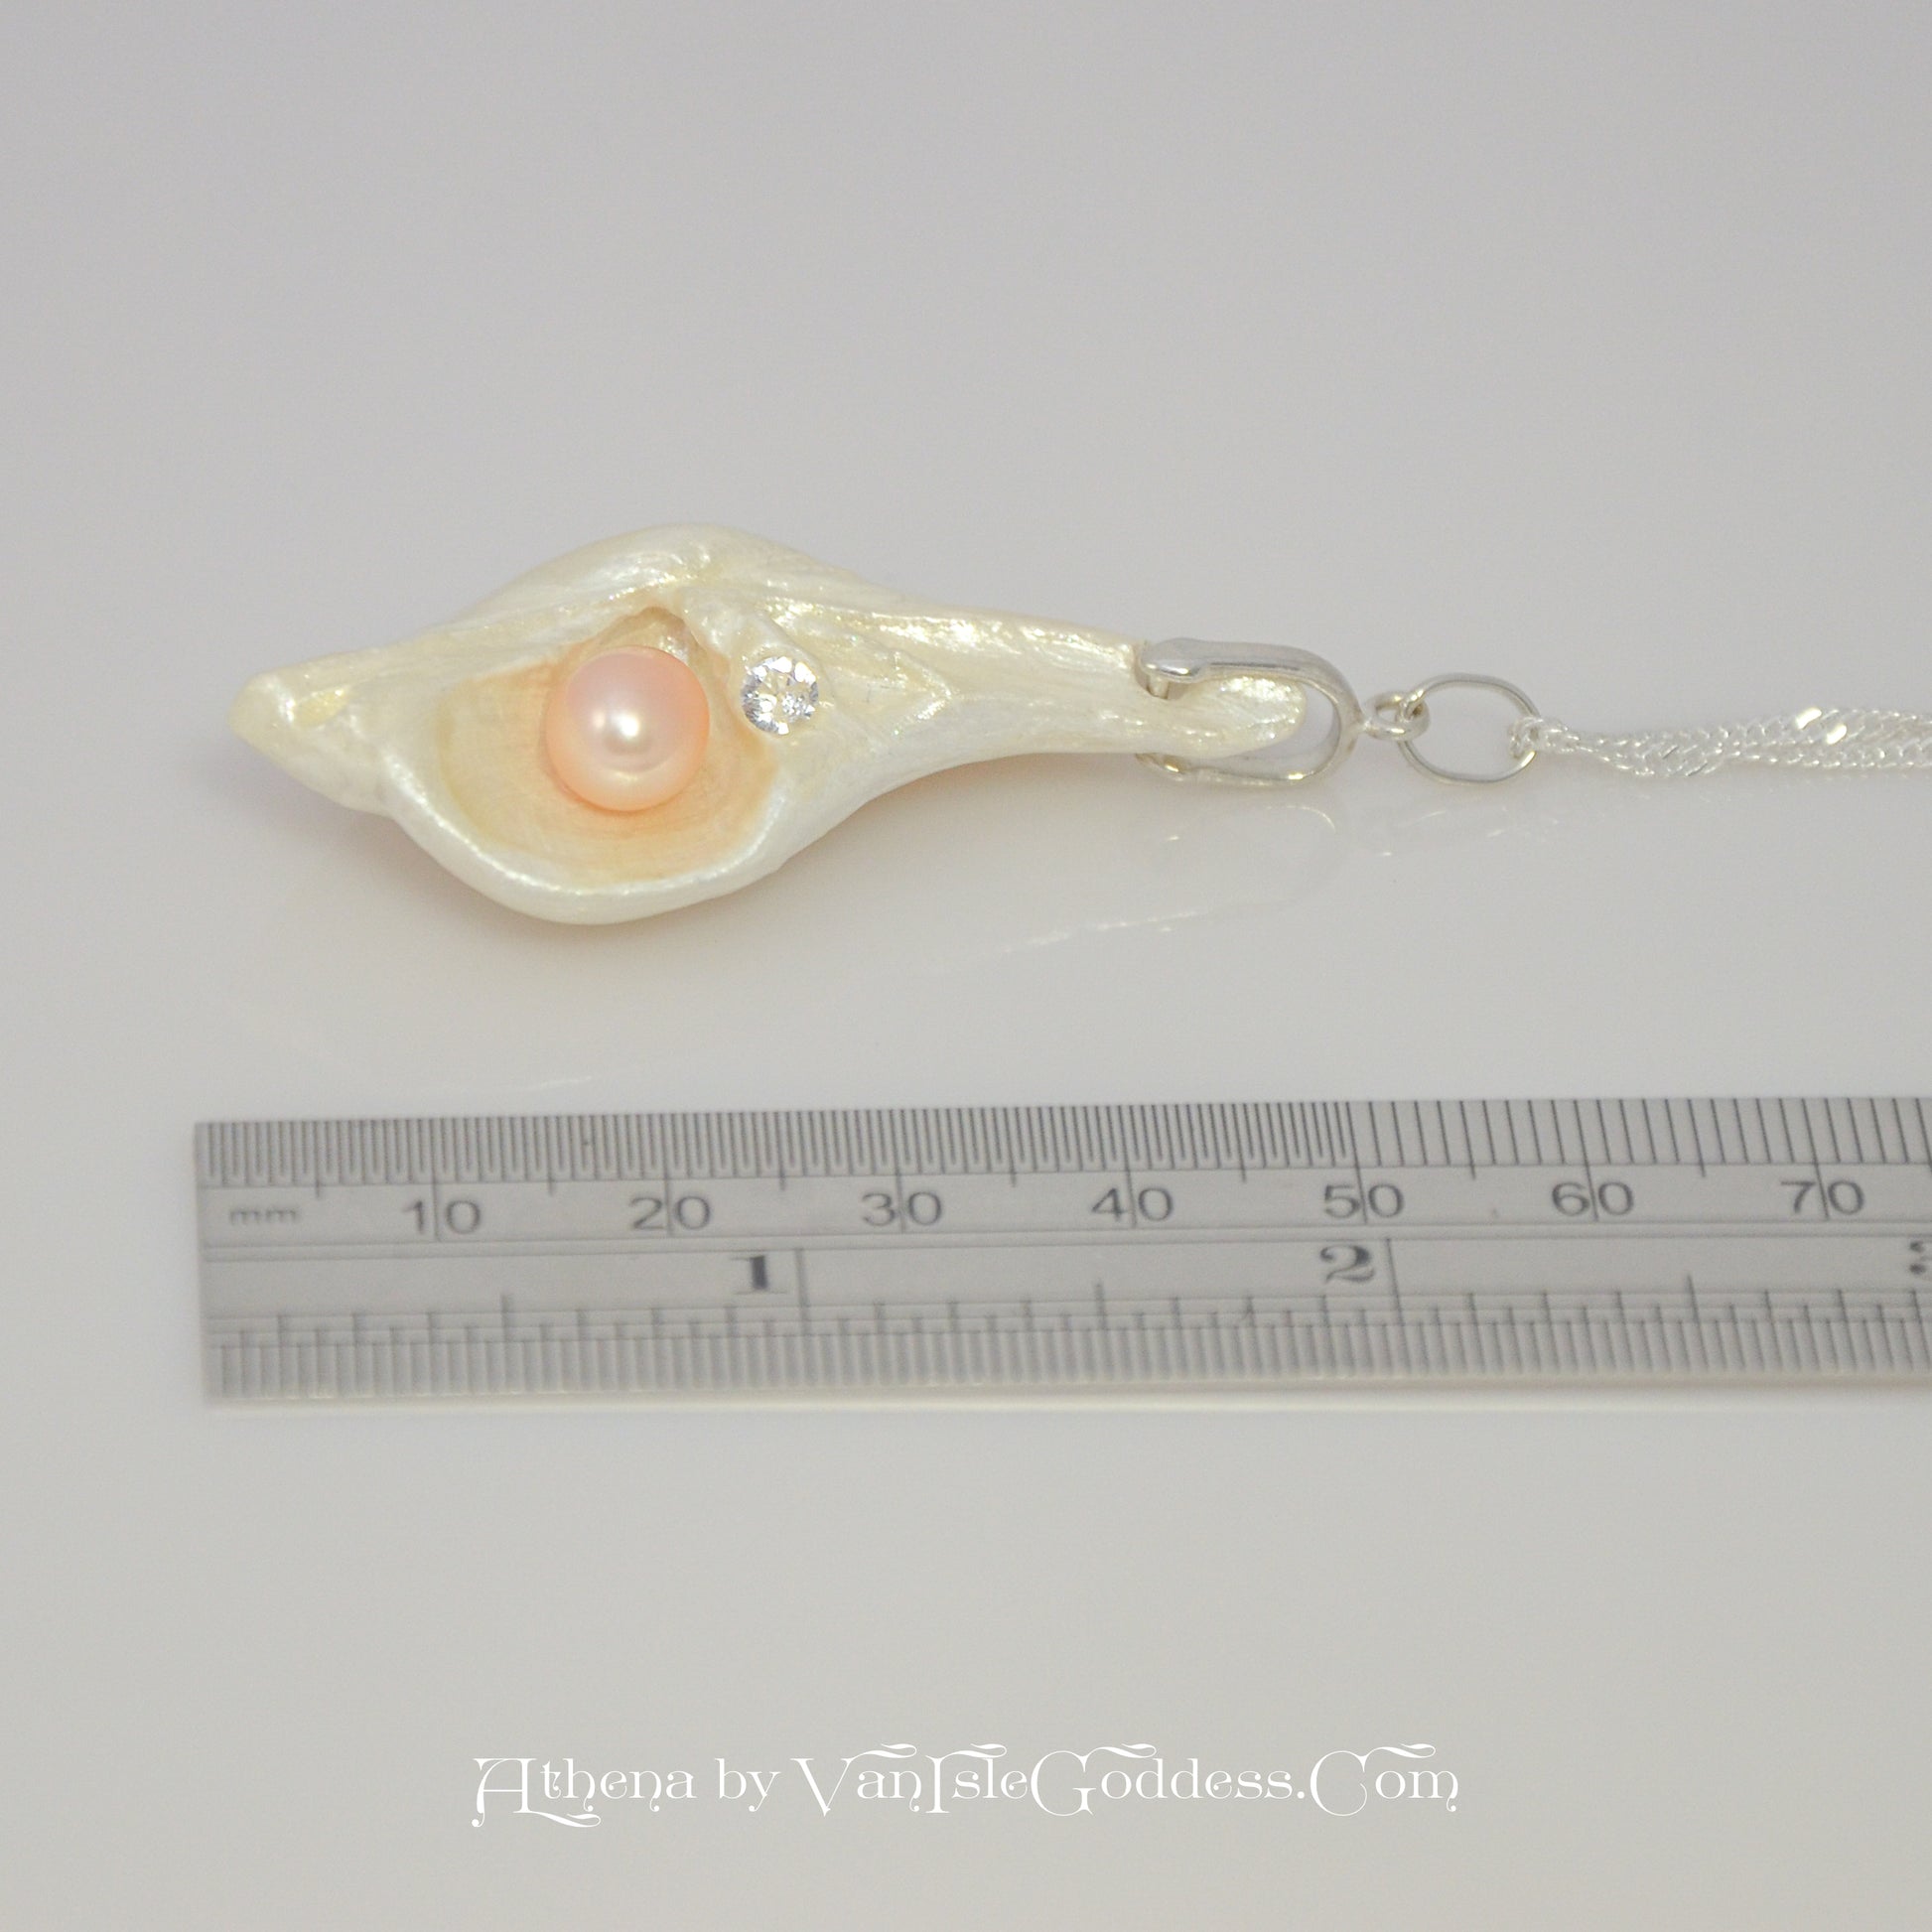 The pendant is laying on it side along a ruler so the viewer can see the length of the pendant.